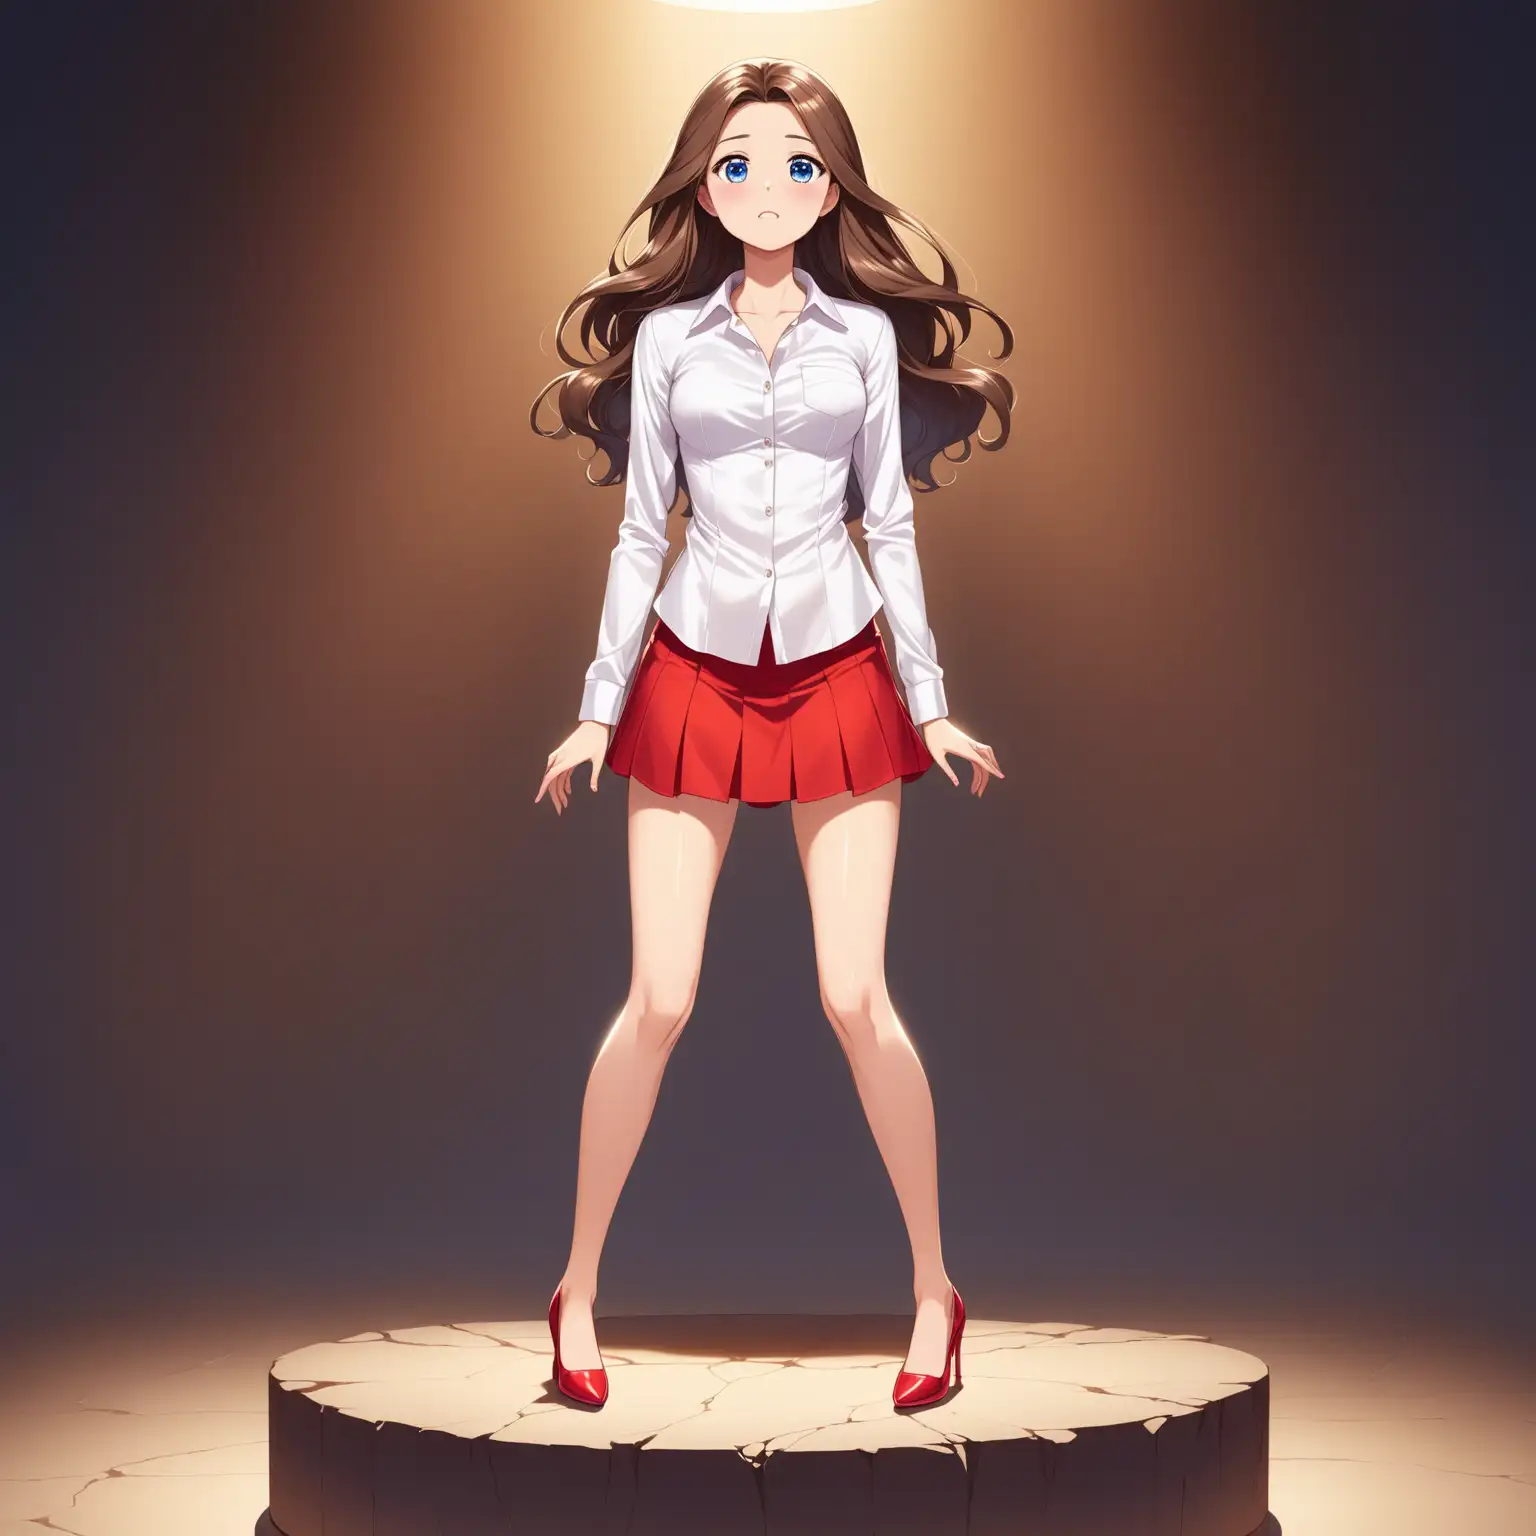 Dynamic front view, full body, in a room with dimmed light, a woman standing on a pedestal in the middle of the room, arms against the body, Skipper from Barbie 18 years old, measuring 165 cm and weighing 54 kg slim, blue eyes, long wavy brown hair, G cup breasts, petrified gaze with an expression of ecstasy, Ivory satin stretch shirt with long sleeves and short skirt in vibrant red linen and red high heels